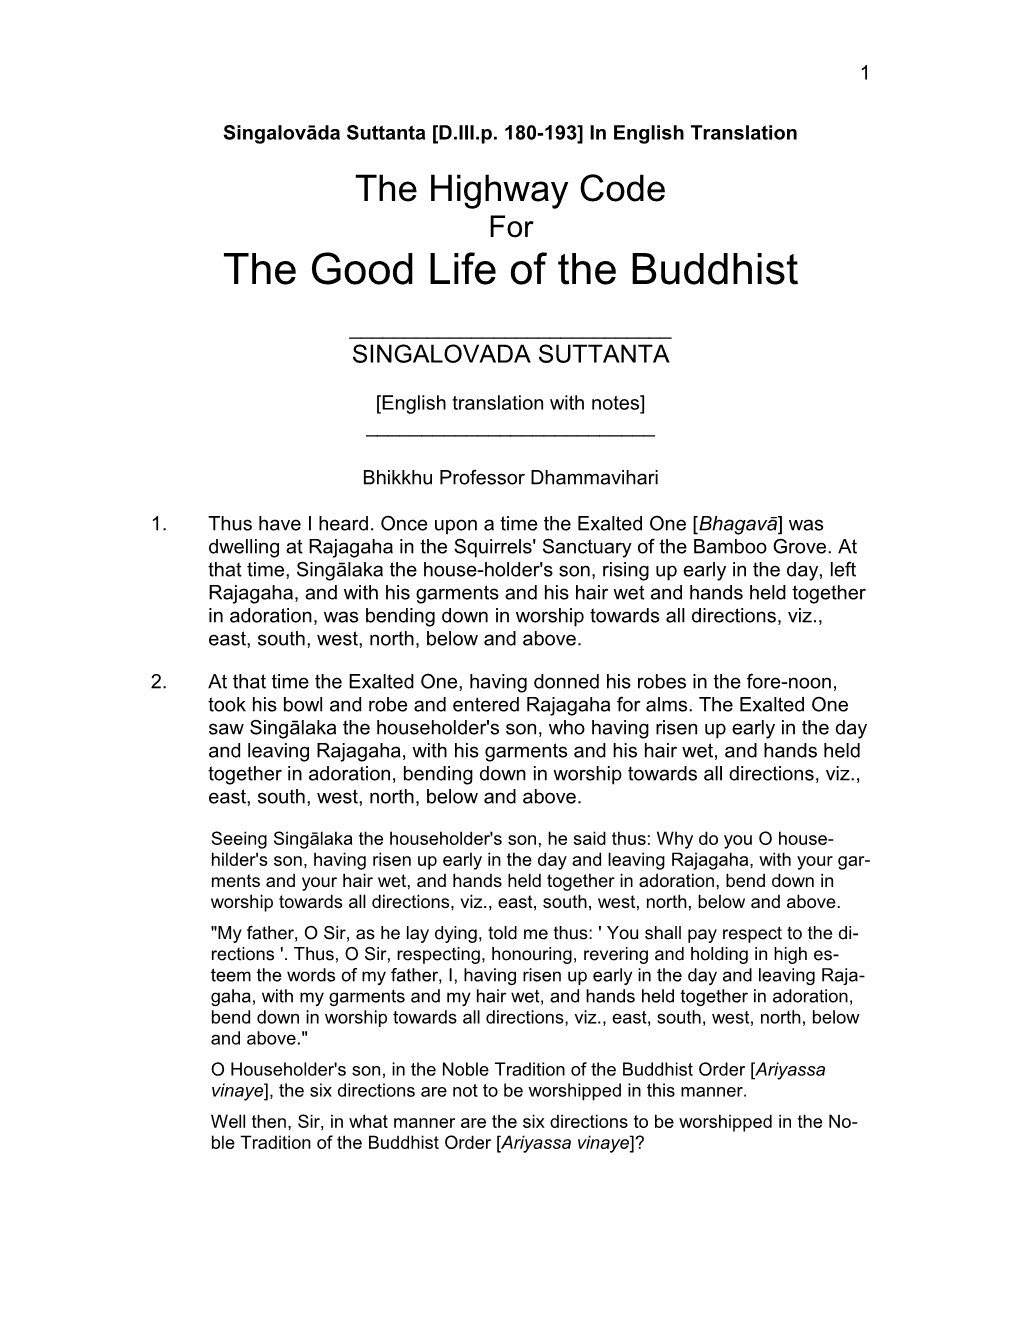 The Highway Code for the Good Life of the Buddhist (Singalovāda Suttanta in English Translation)